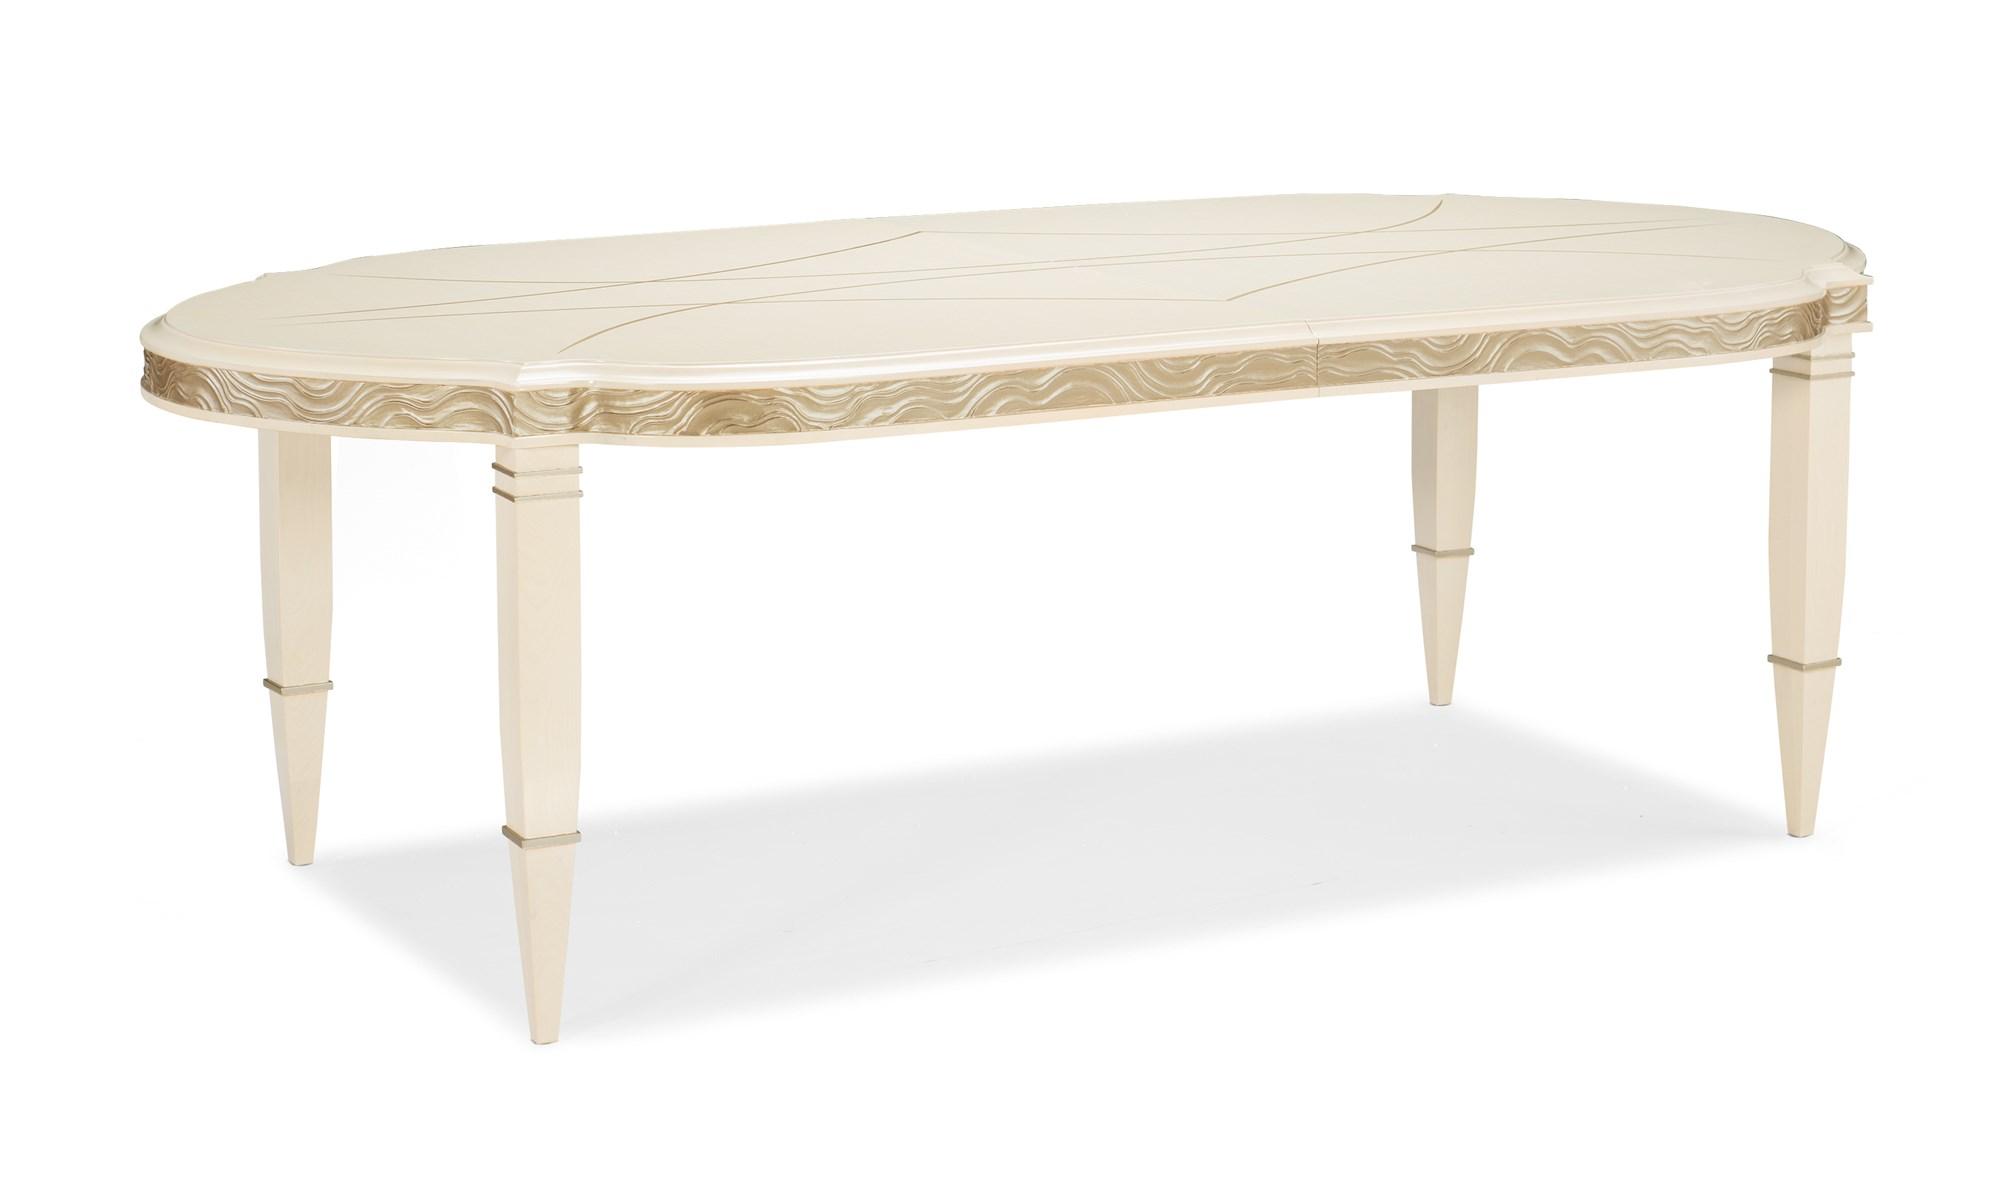 Contemporary Dining Table ADELA DINING TABLE C012-016-201 in Off-White, Taupe 